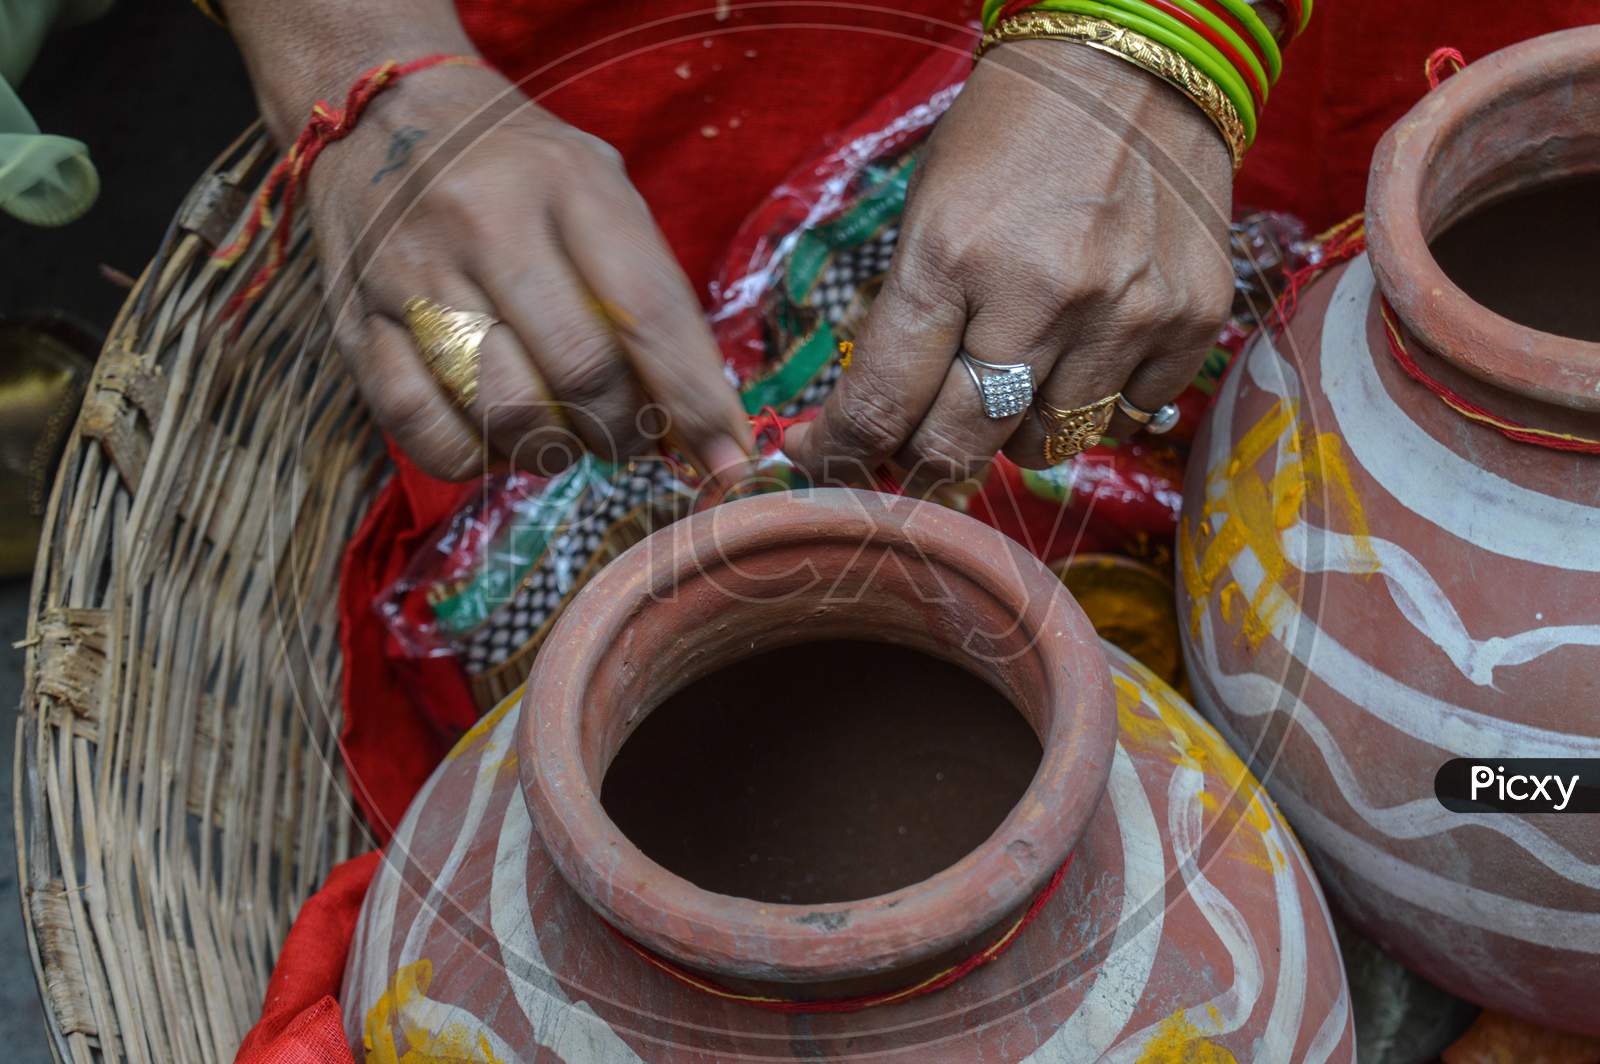 Lady Tie Thered On Clay Pot In Indian Weddings.